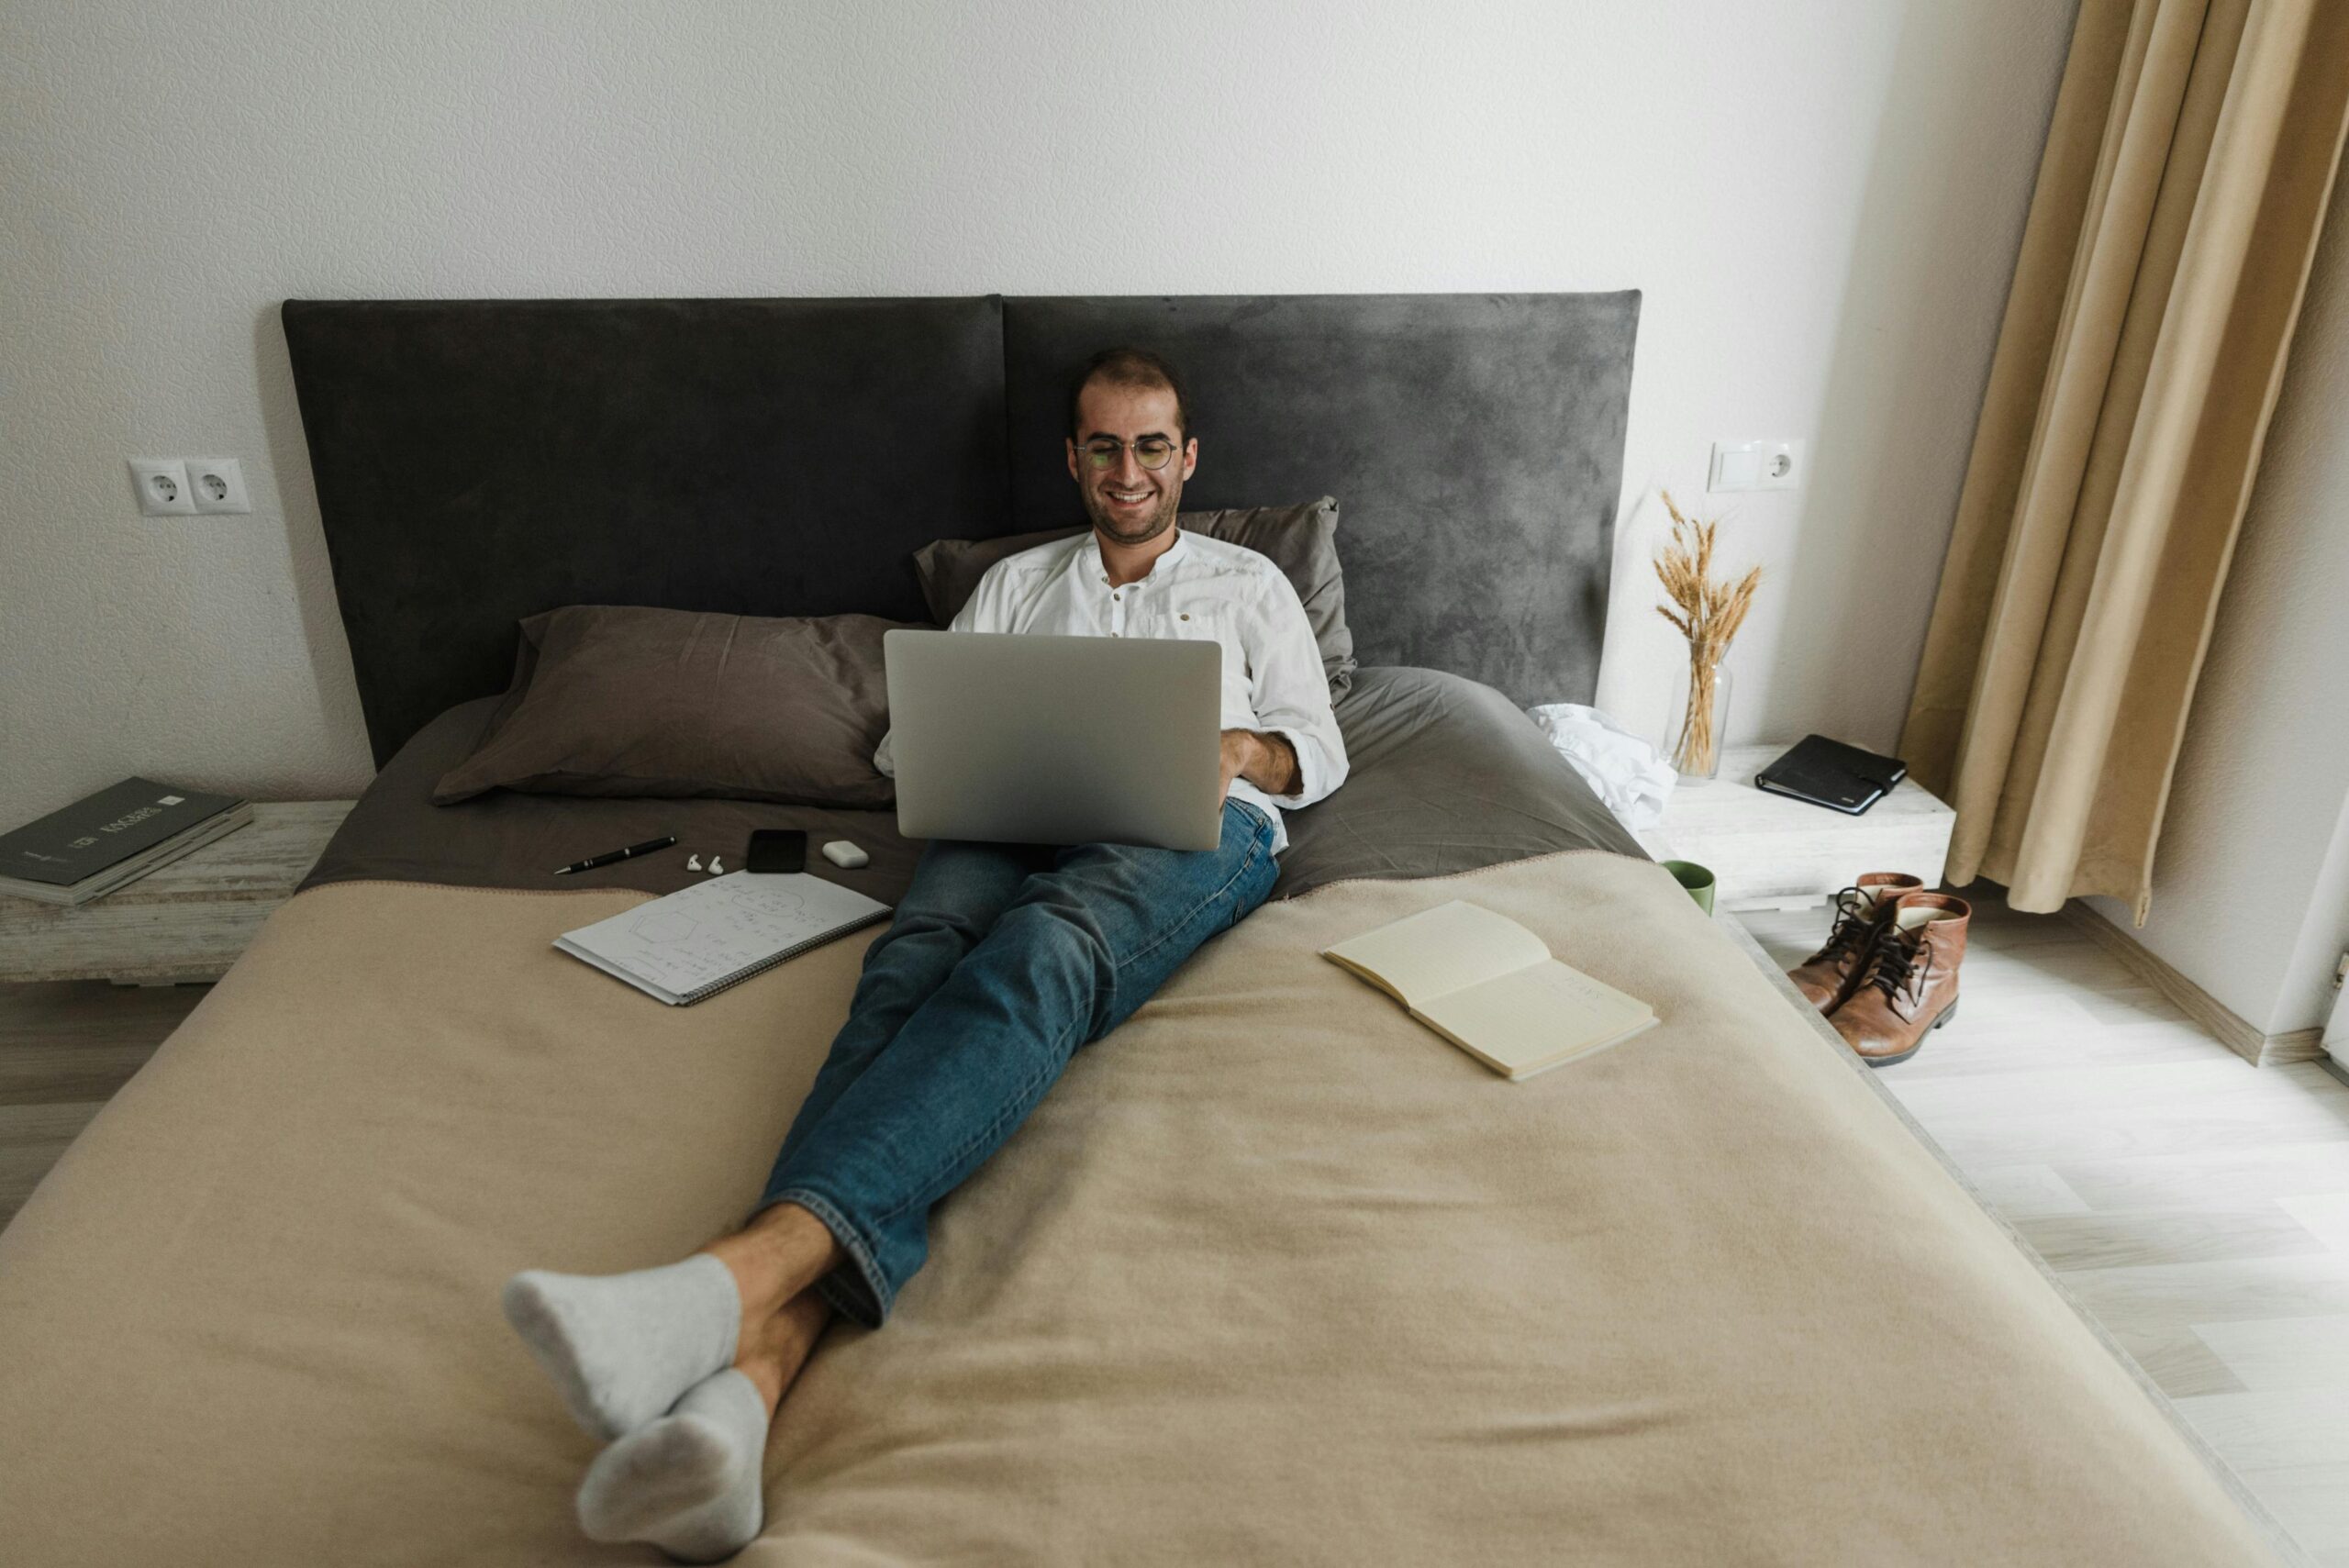 Man using laptop in bed to send email